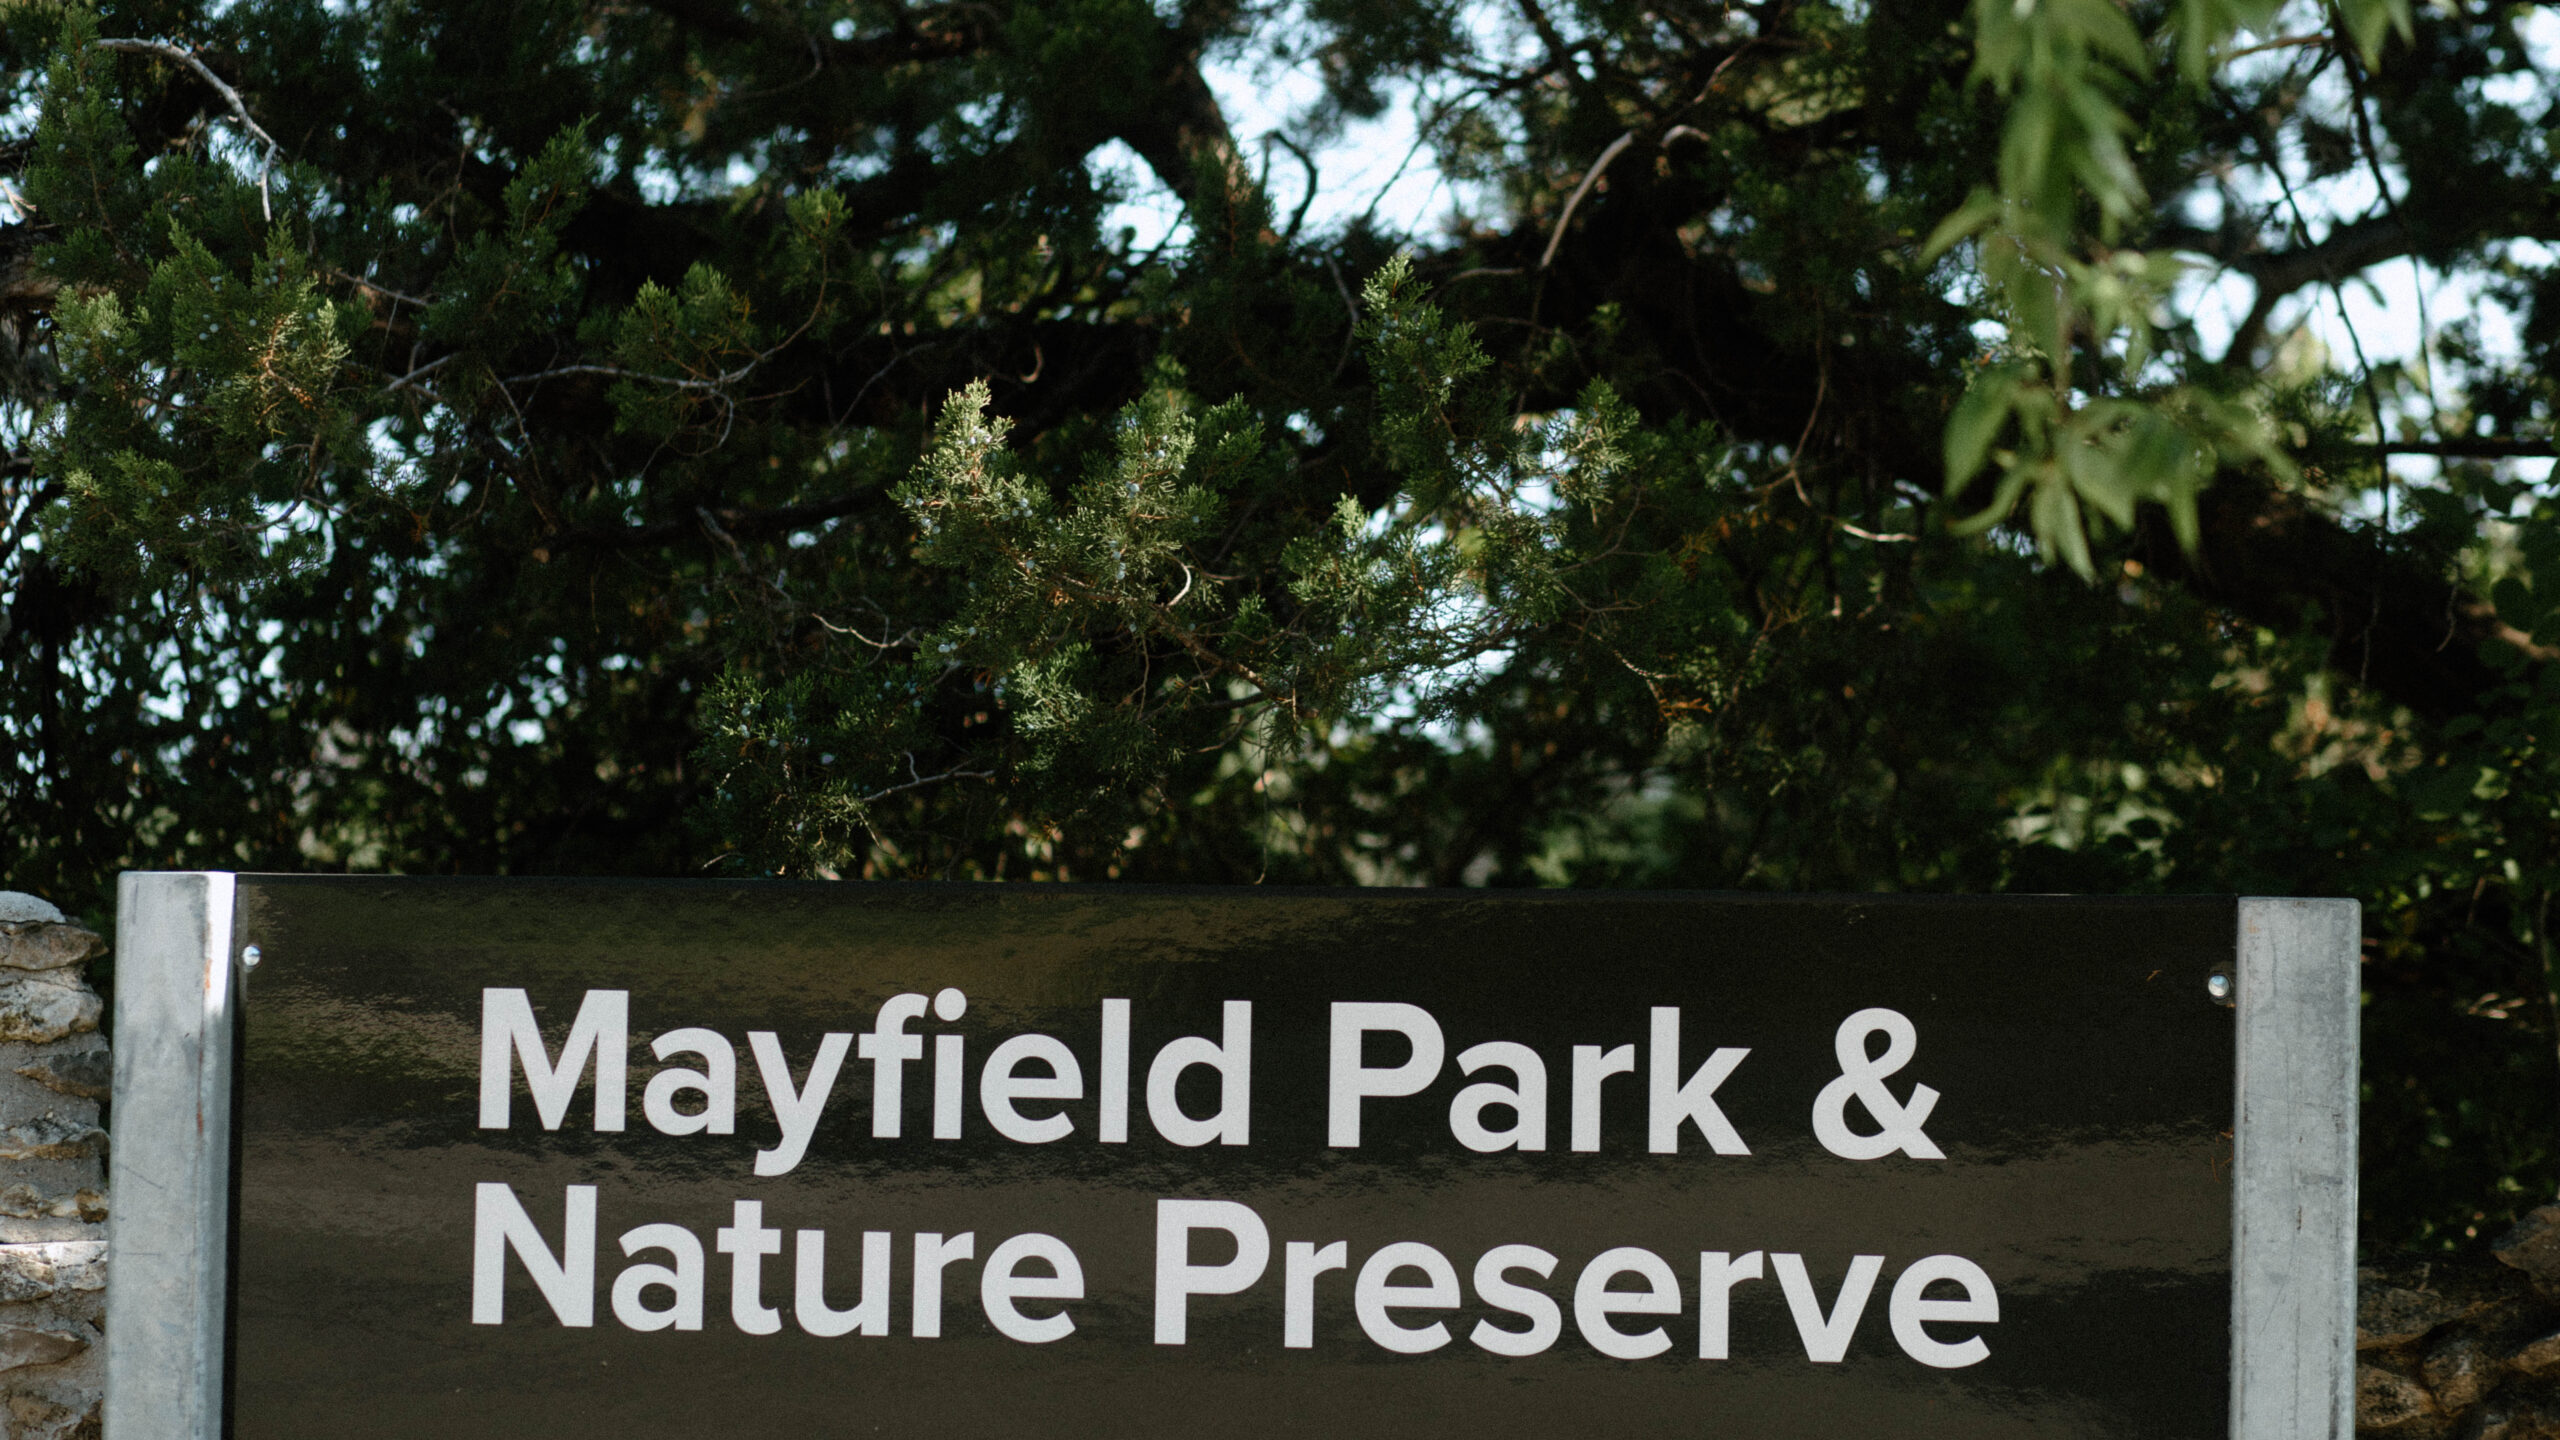 A photograph of the Mayfield Park & Nature Preserve signage outside of the park.